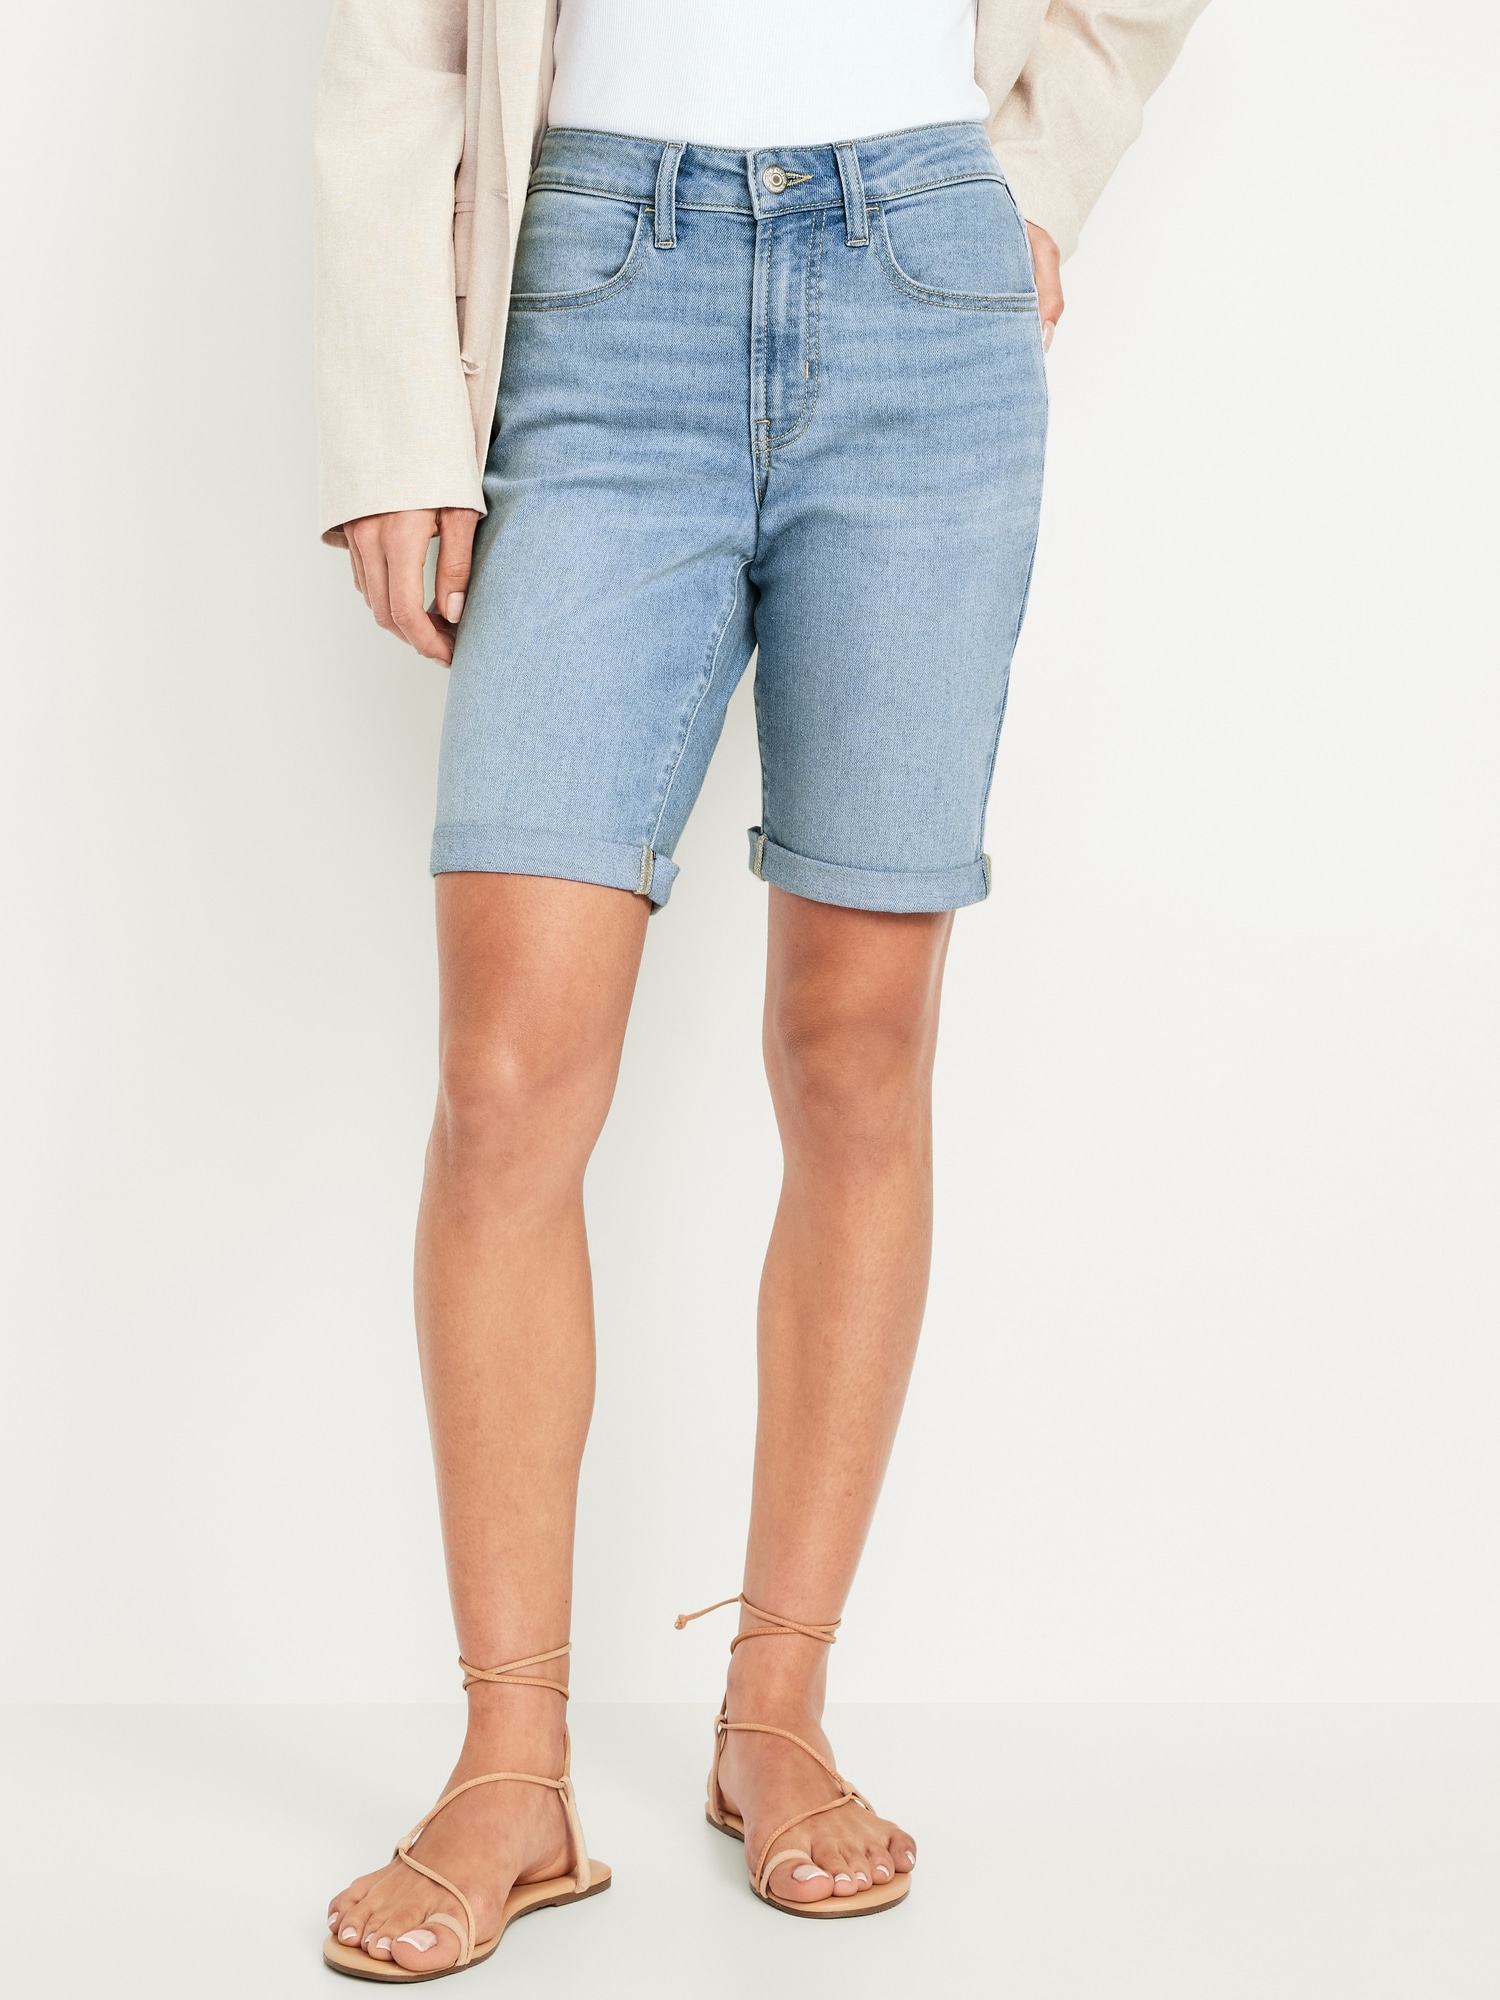 High-Waisted Wow Jean Shorts -- 9-inch inseam Hot Deal